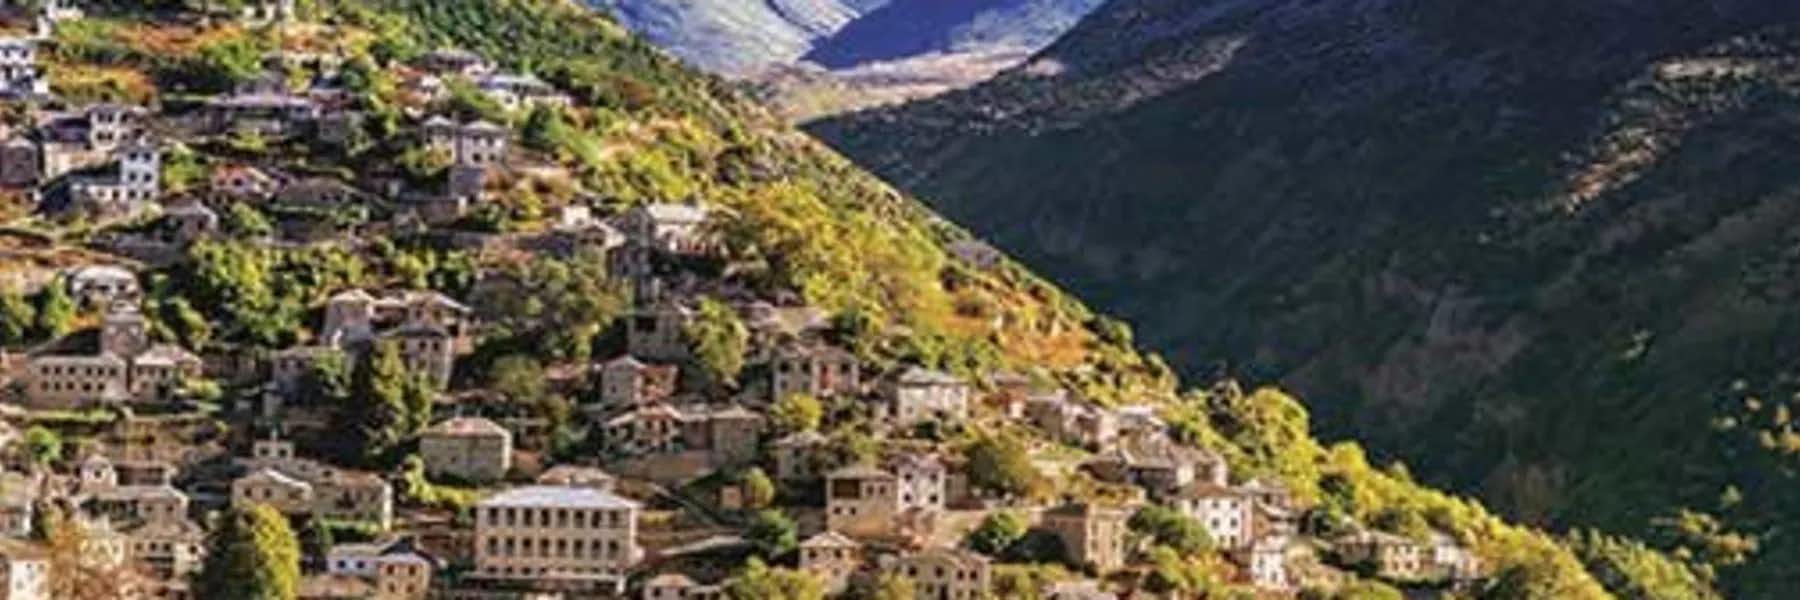 A Mystical Village and a Hiking Adventure in Greece